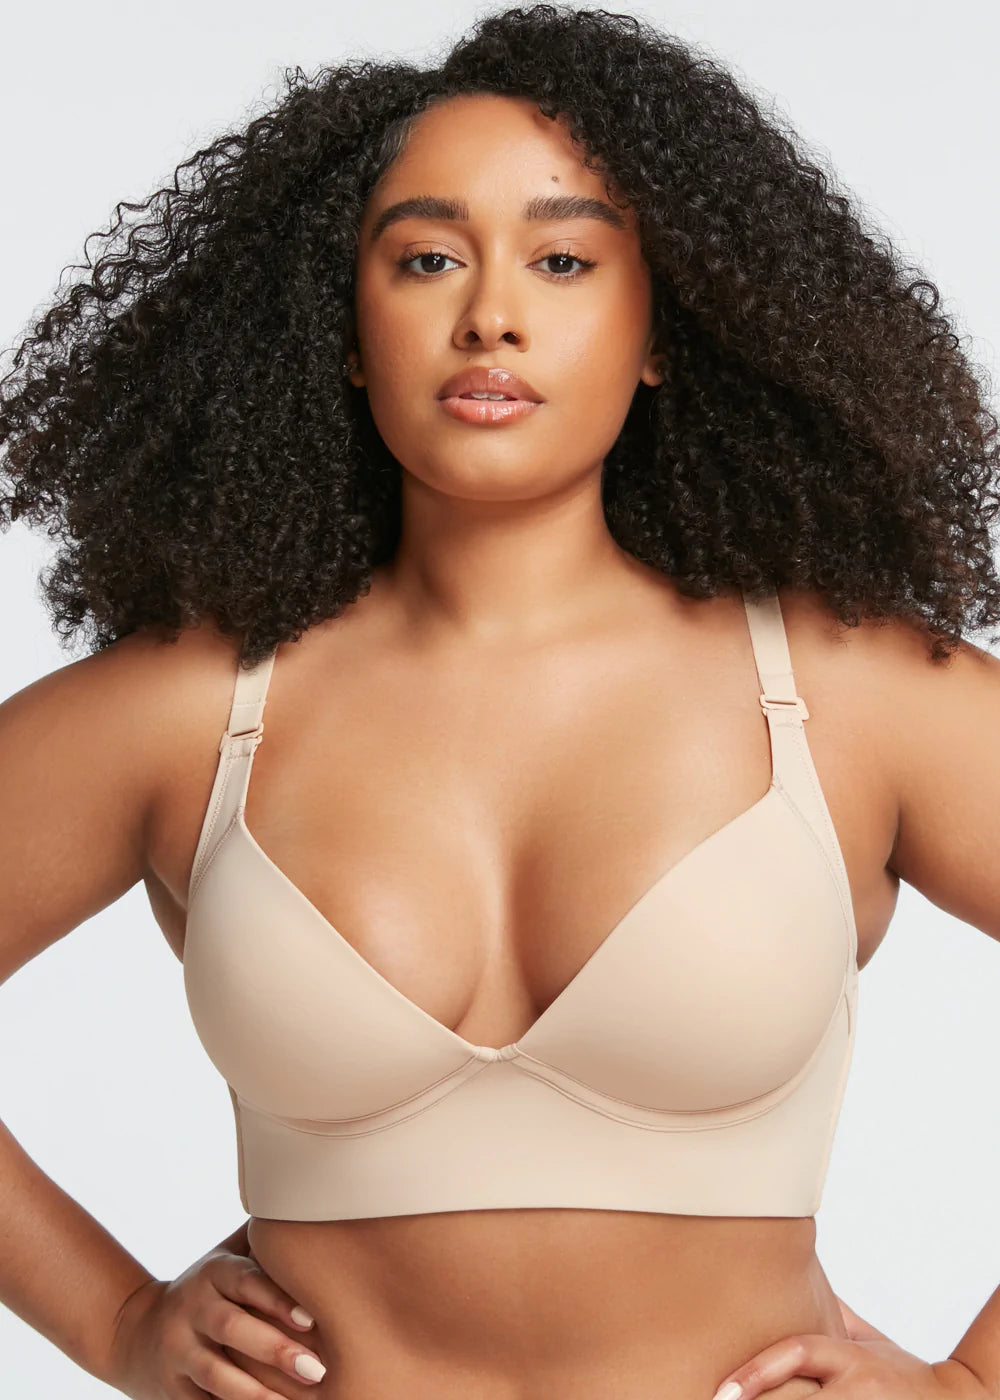 Our Adjustable Wired Push Up Bra has gone viral ❤️ Meet your new favorite  bra ladies 🍒 #sheswaisted #shapewear